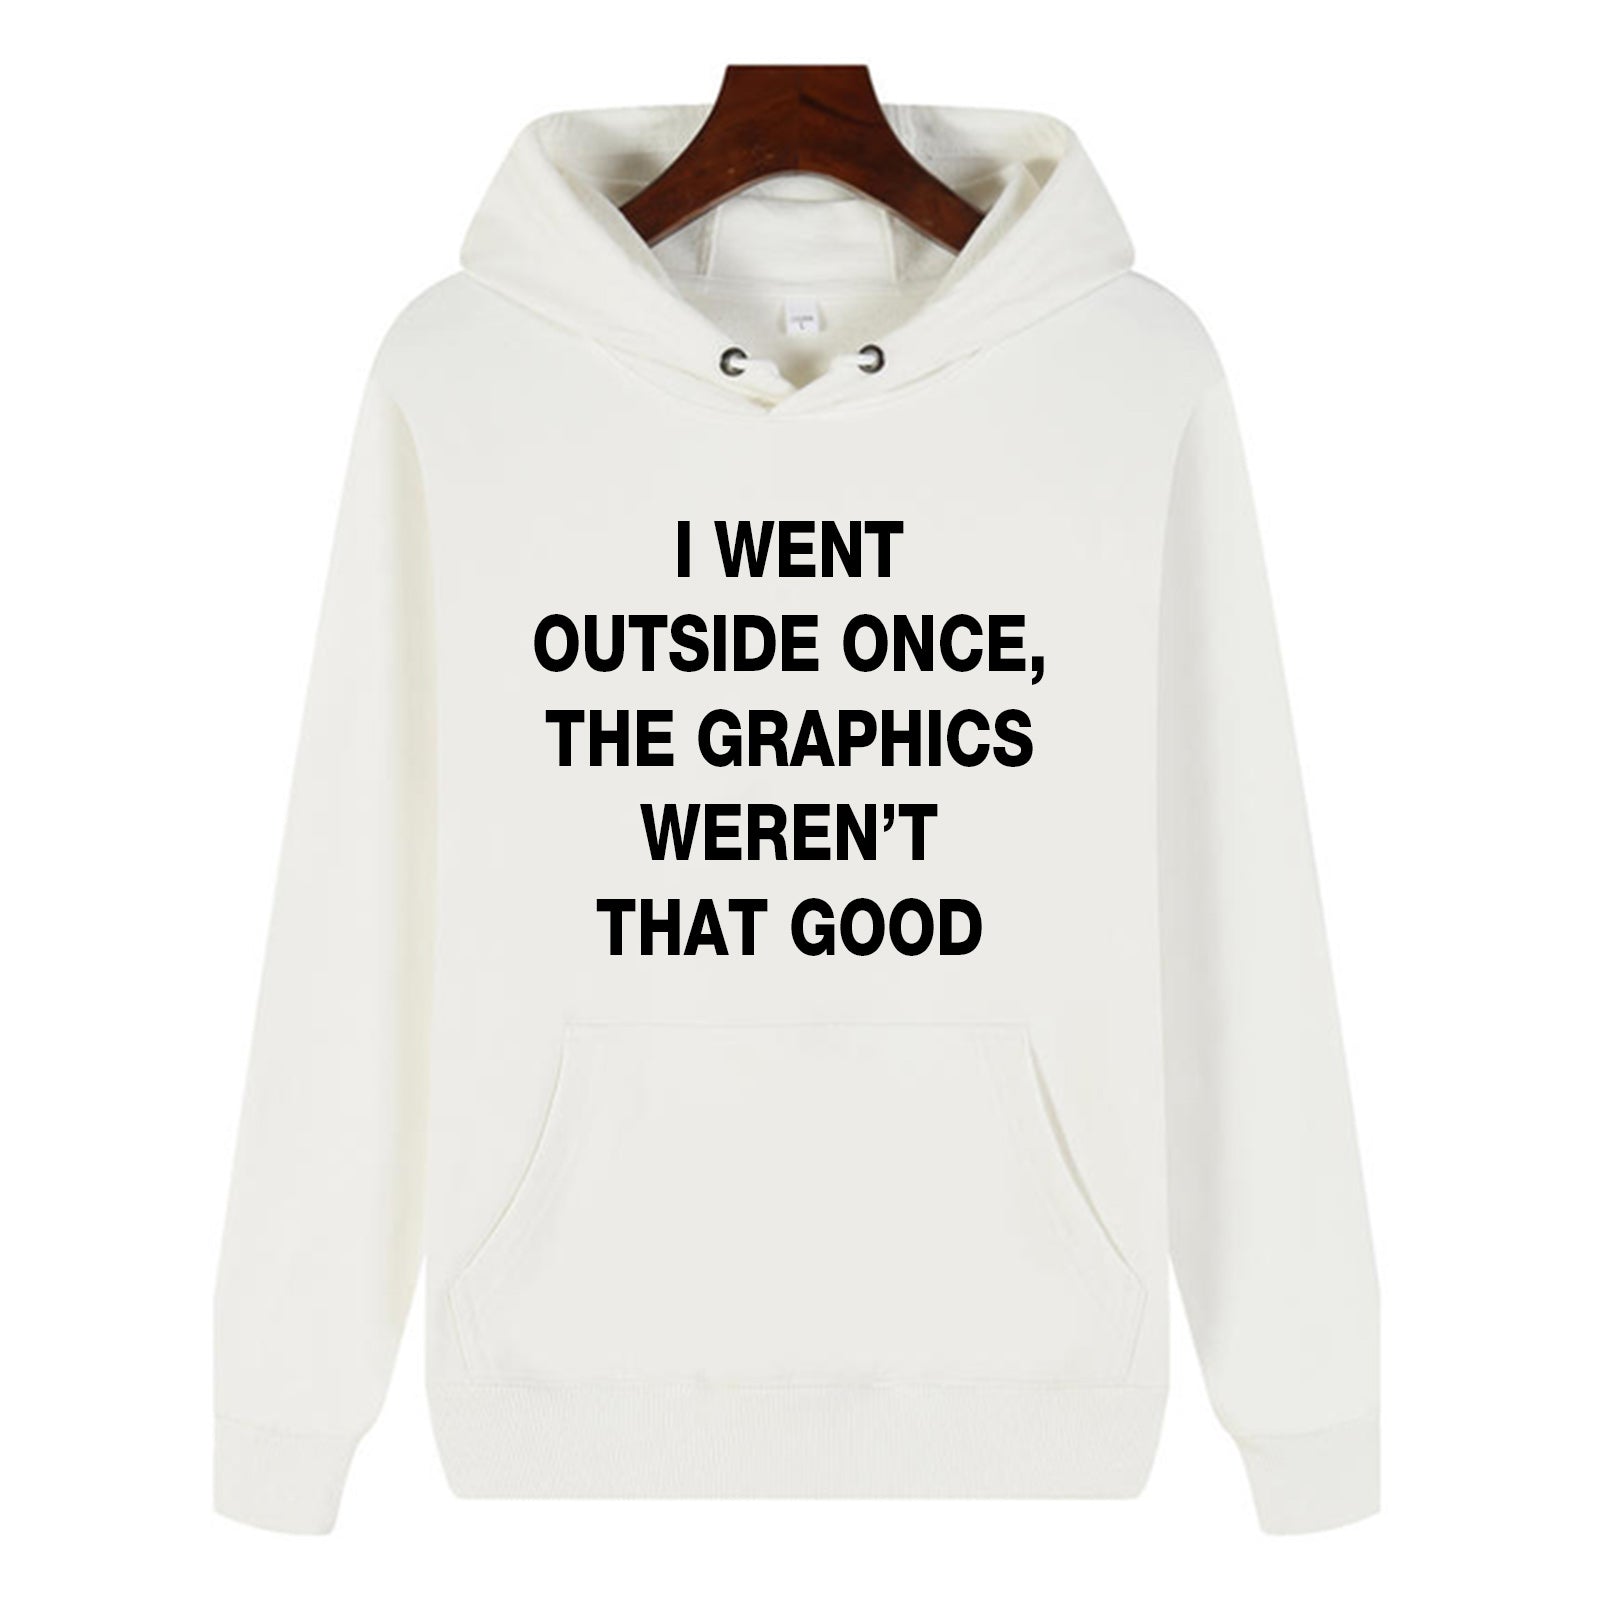 Oversized Loose Fit Hoodie I WENT OUTSIDE ONCE Hooded Sweatshirt